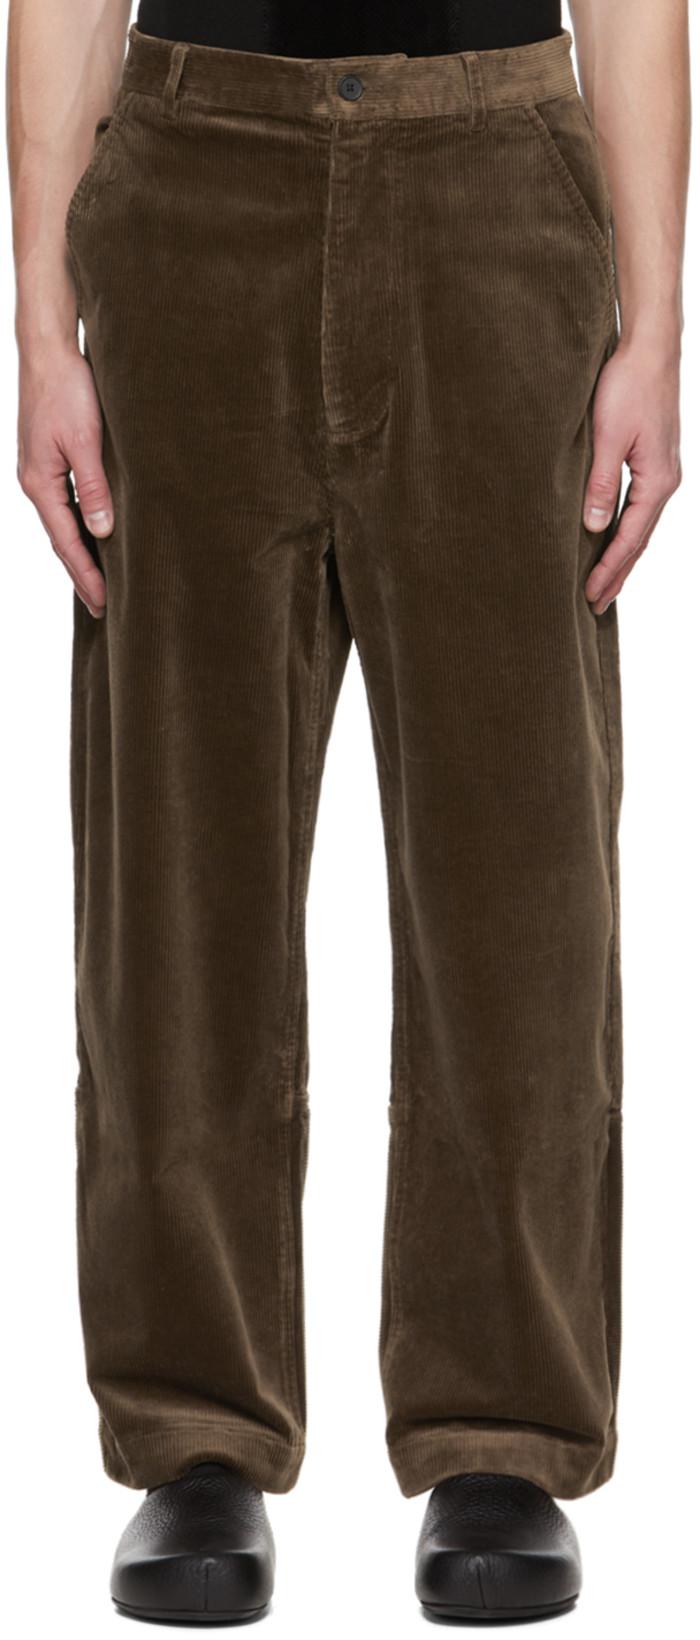 Brown Paneled Trousers by A PERSONAL NOTE 73